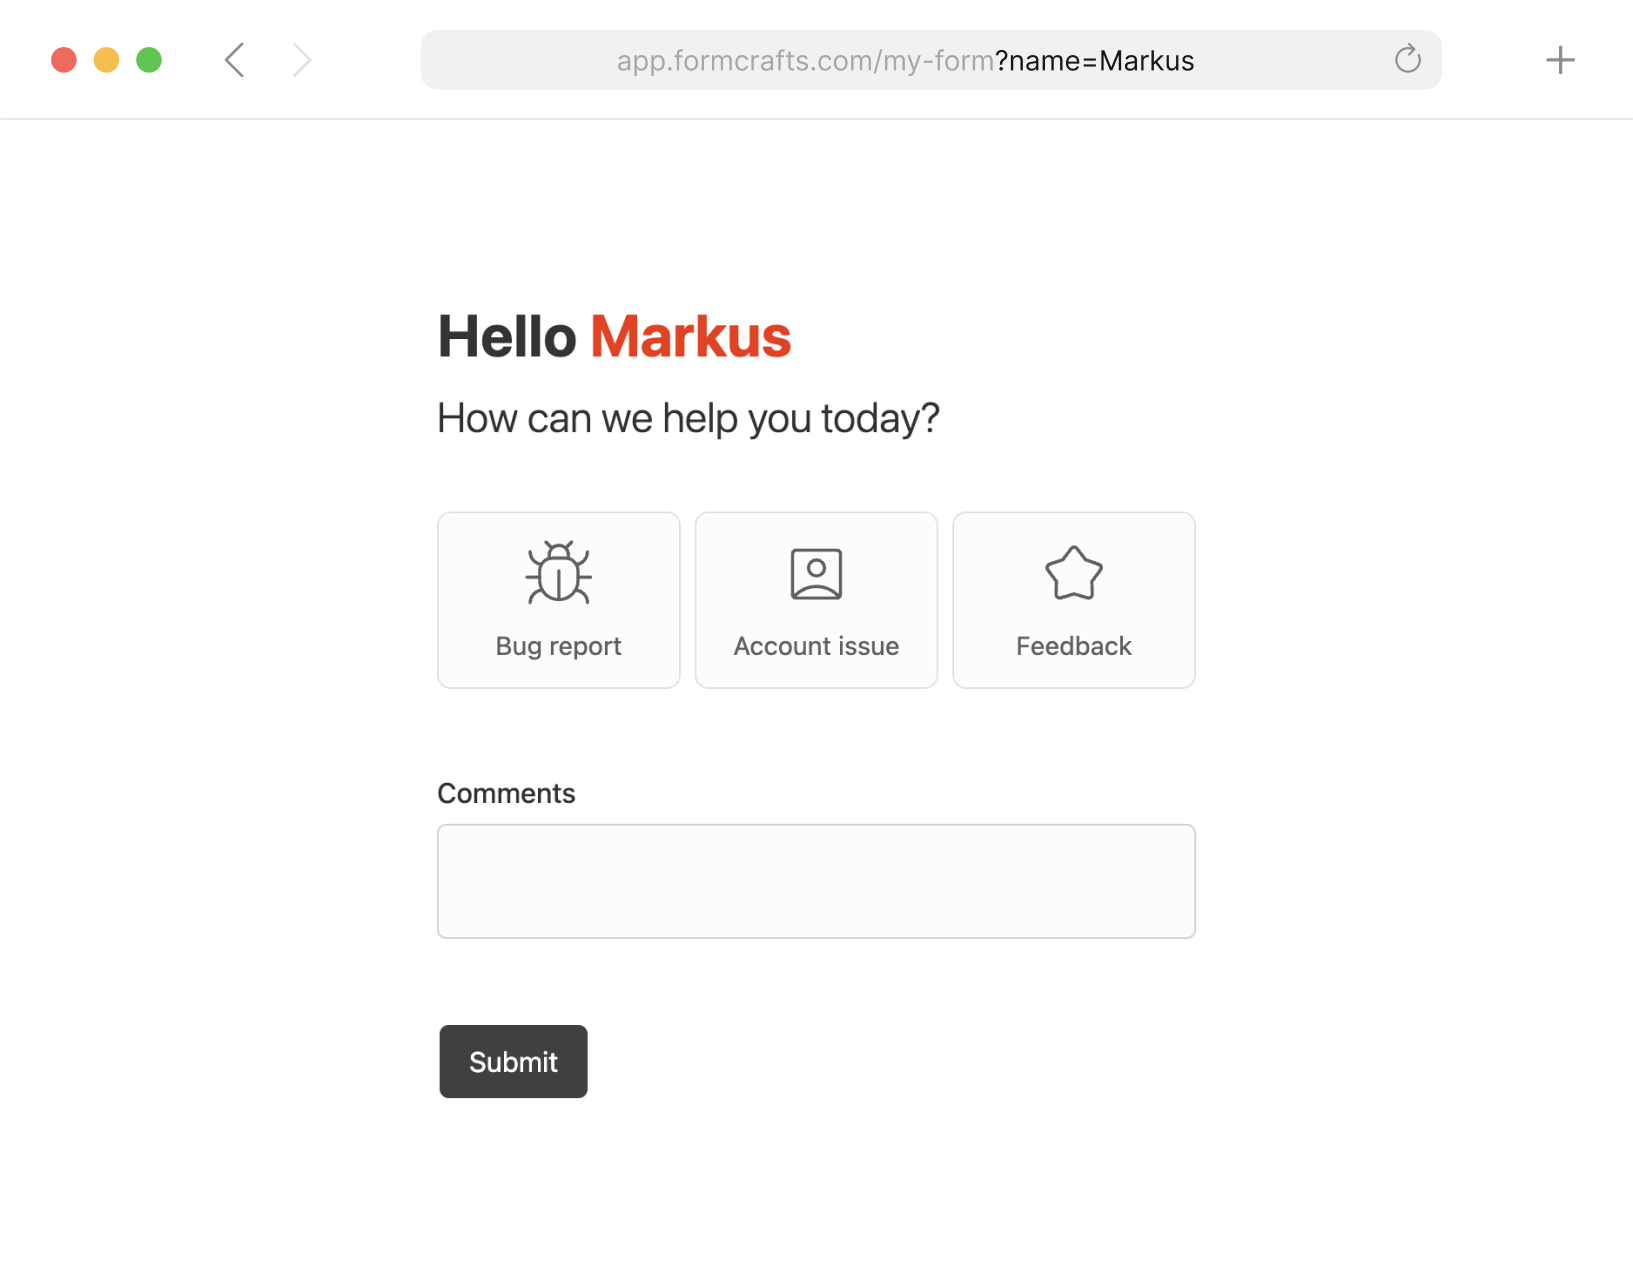 Browser mockup displaying a personalized form